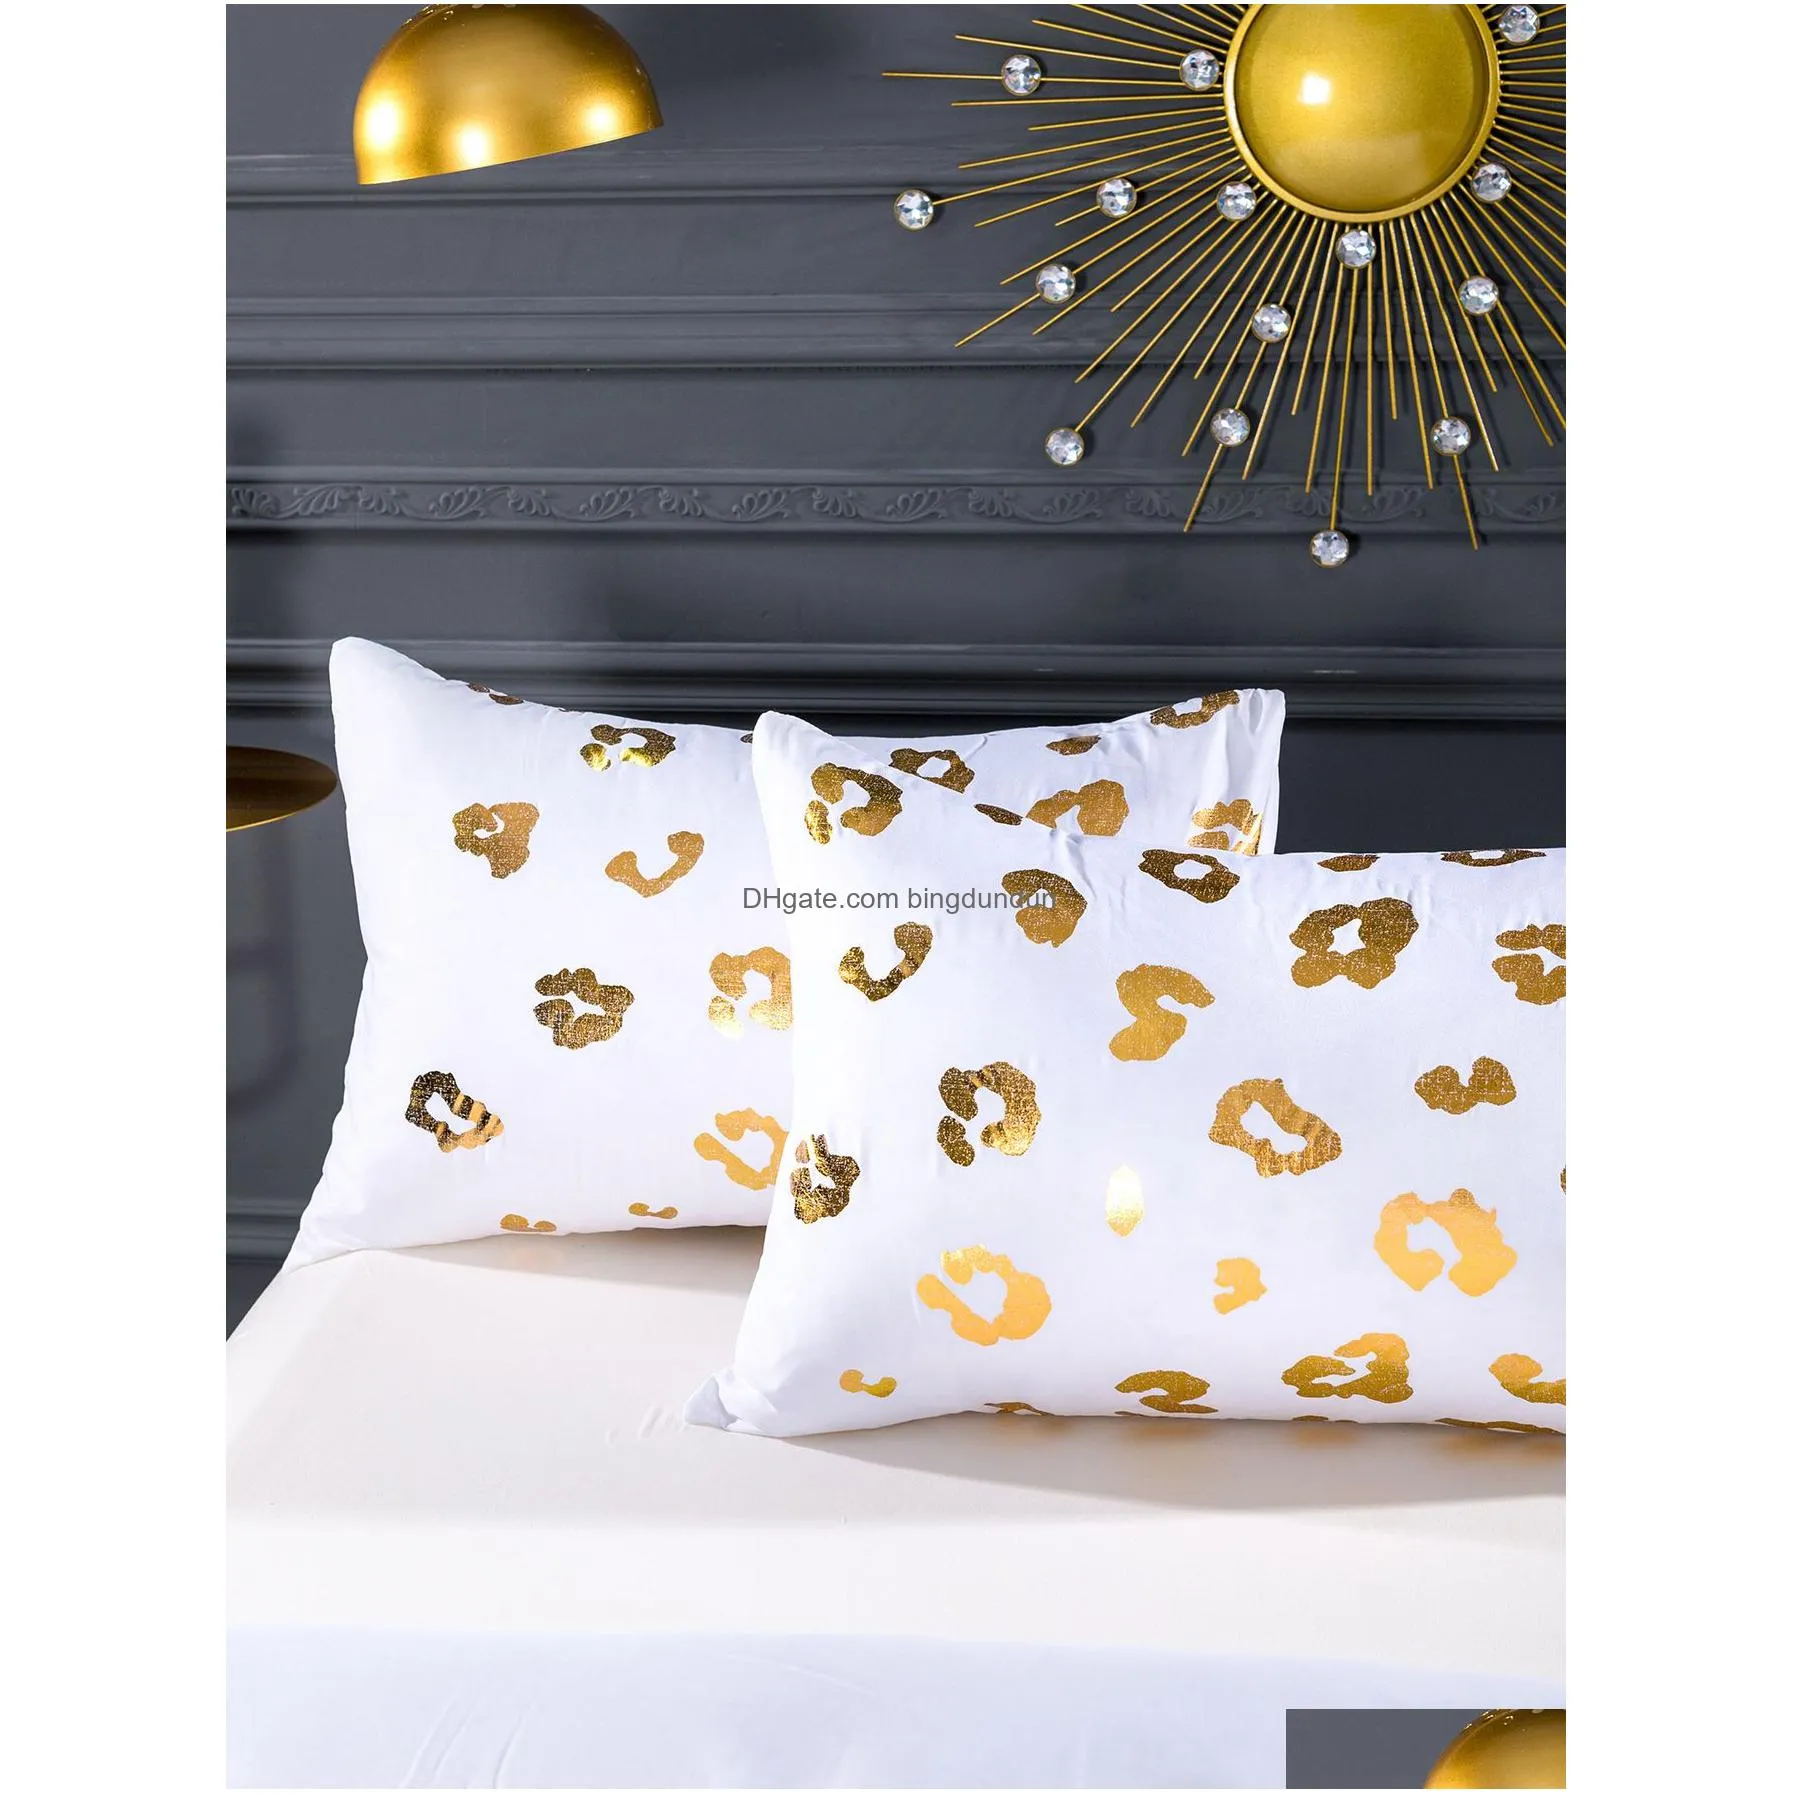 Bedding sets White Luxury European Royal Gold Embroidery Set 3D Duvet Cover Bed Sheet Single Double Queen Size Bedspread Pillowcases